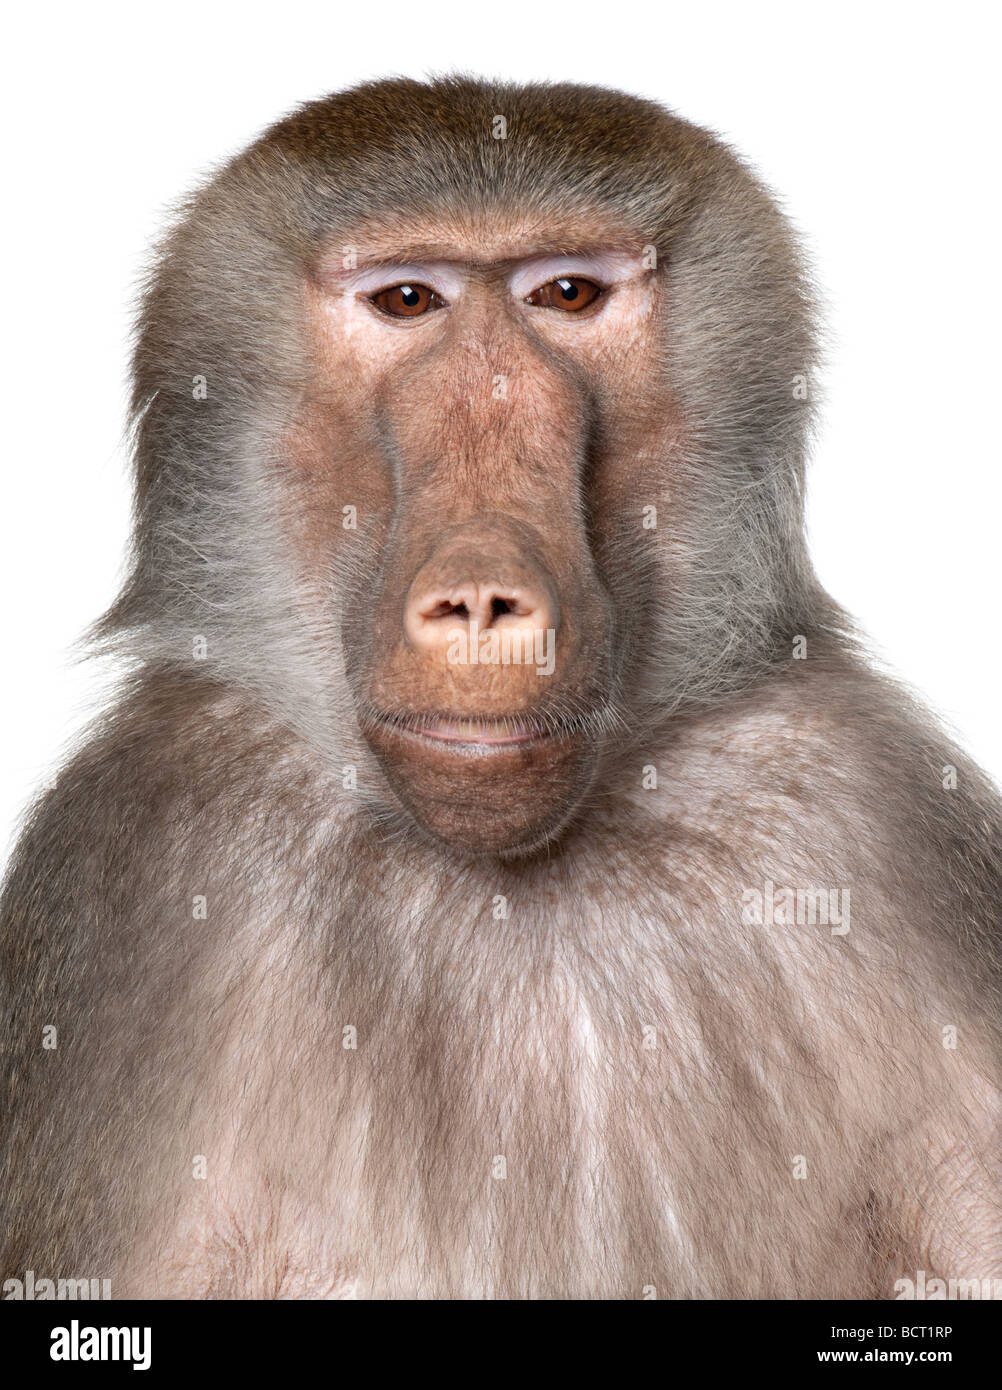 Close-up on a Baboon's head, Simia hamadryas, in front of a white background, studio shot Stock Photo